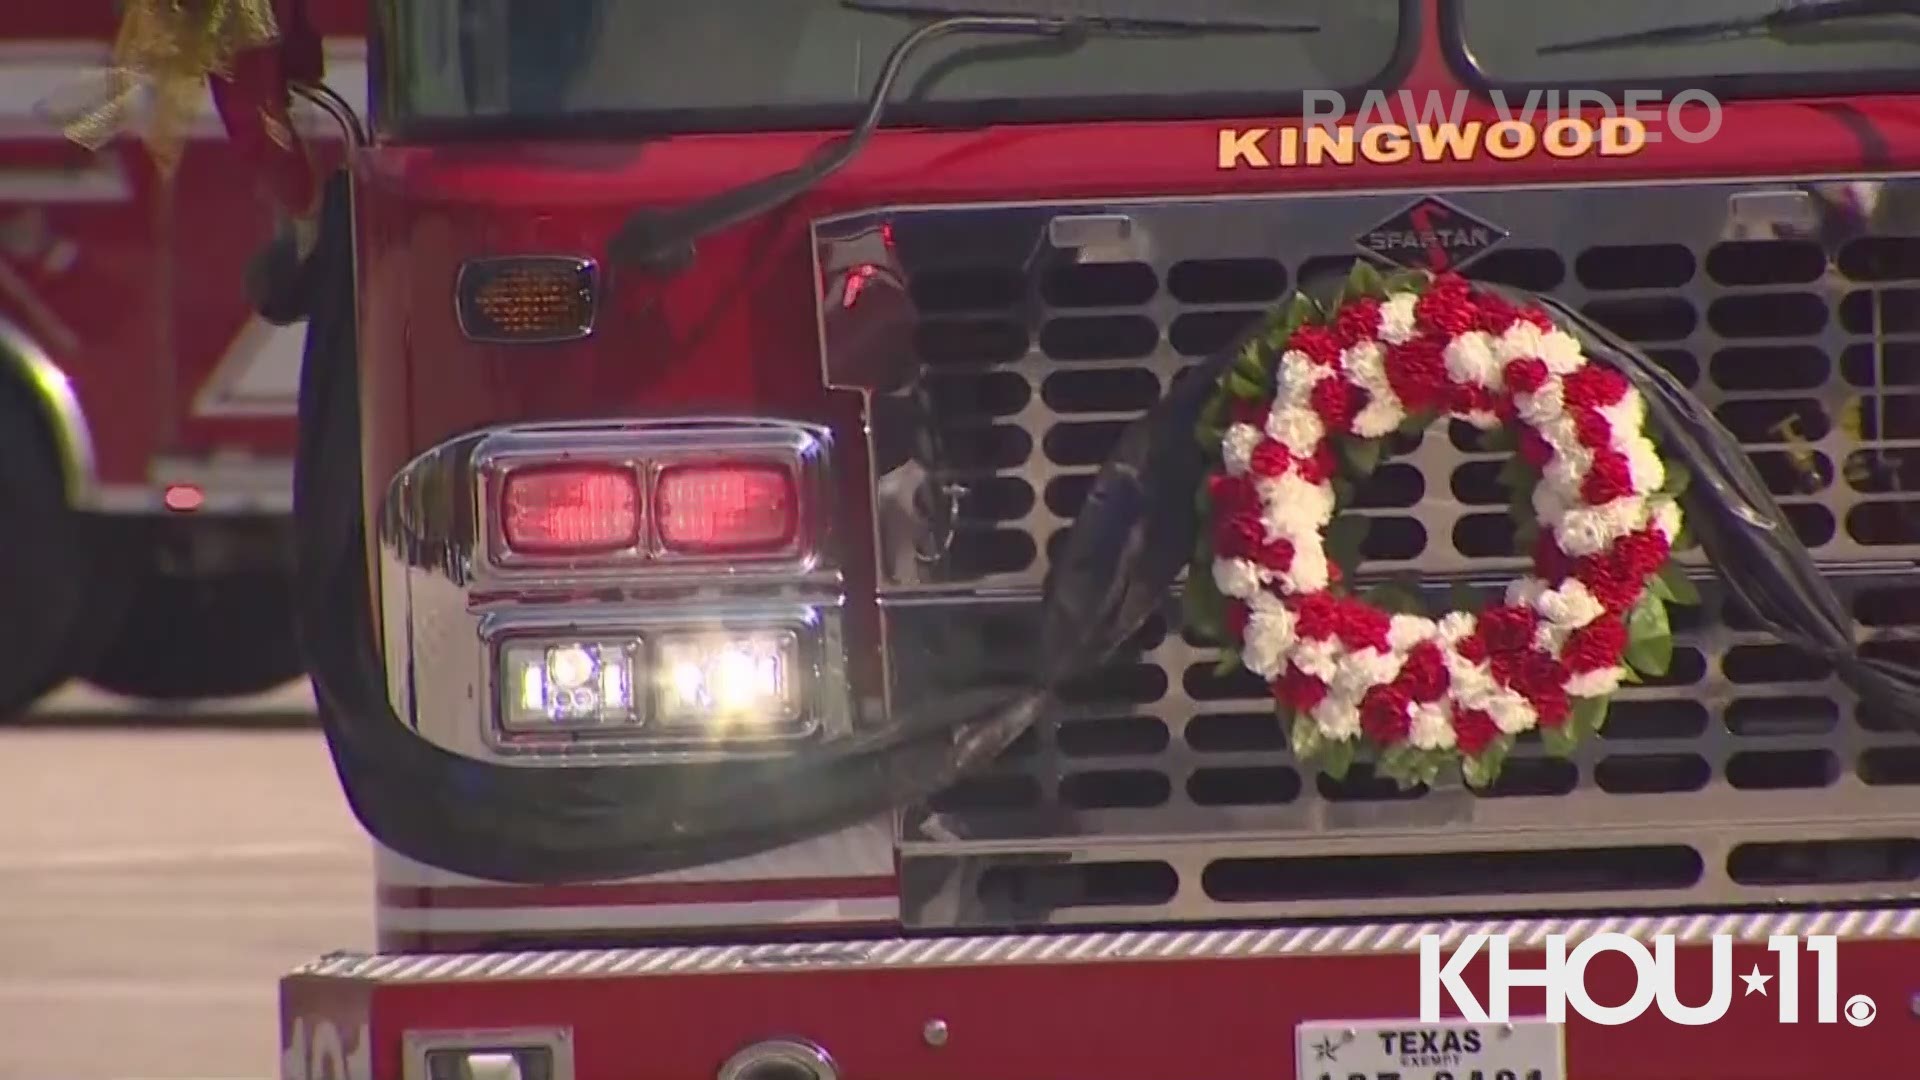 Houston firefighter Jerry Pacheco, who died after a hard-fought battle with COVID-19, was honored with a funeral service Saturday at First Baptist Church.